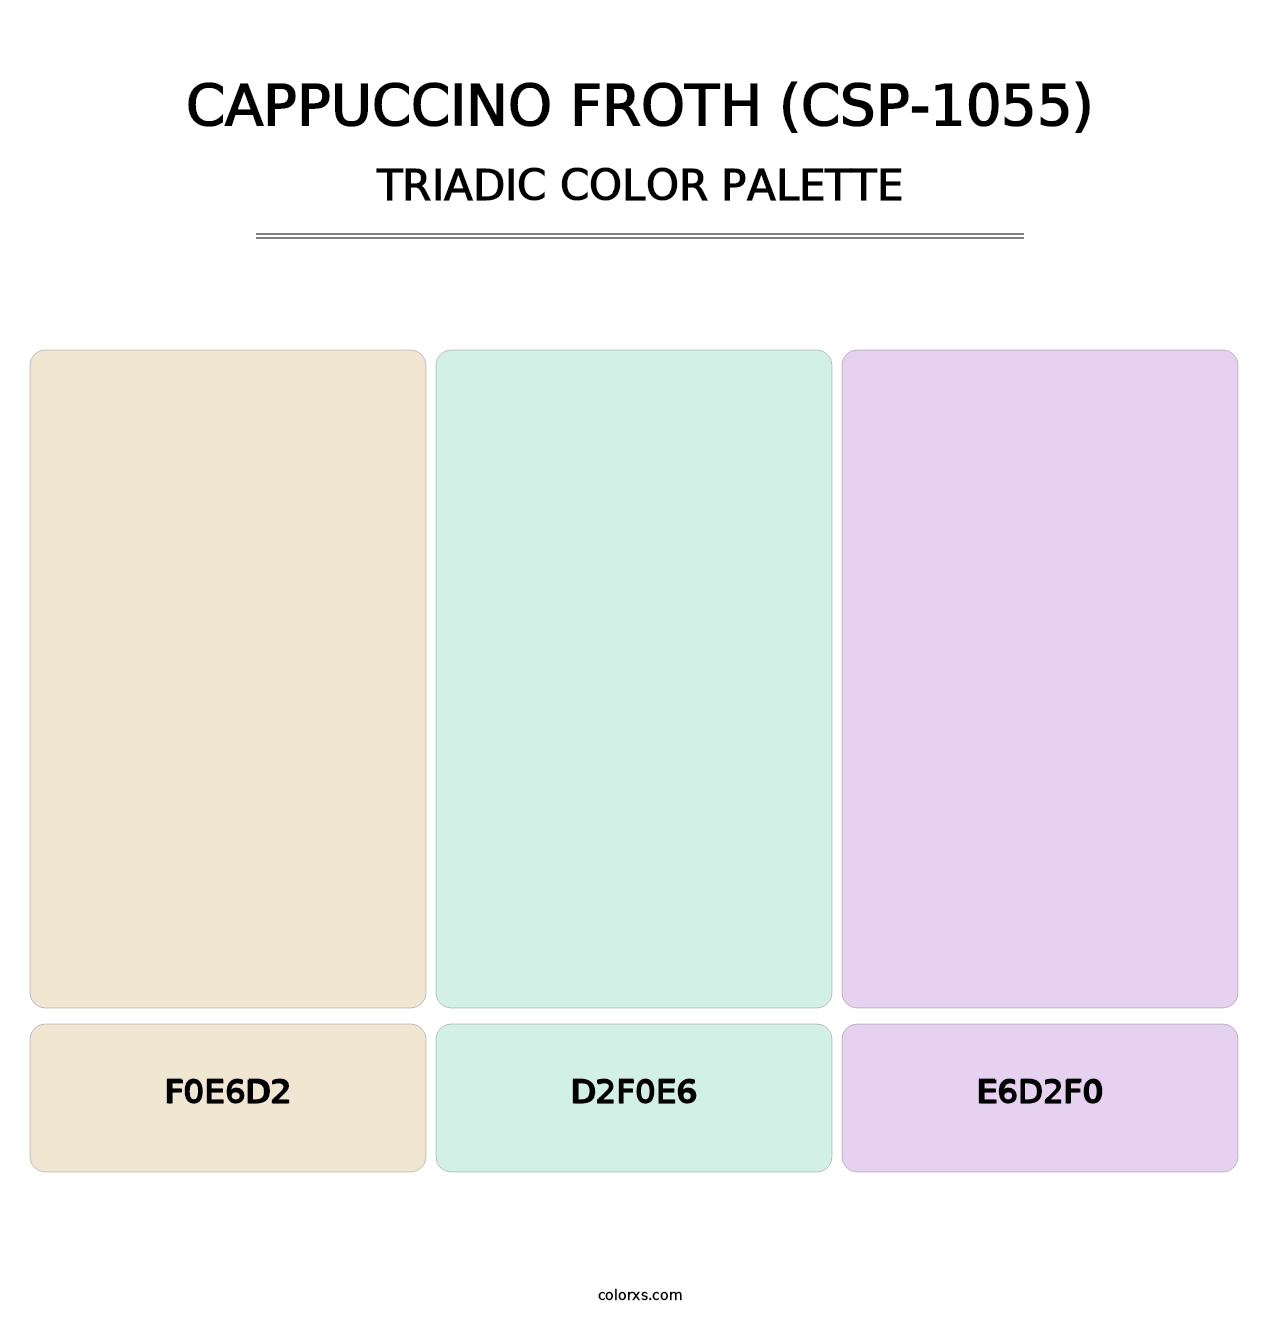 Cappuccino Froth (CSP-1055) - Triadic Color Palette